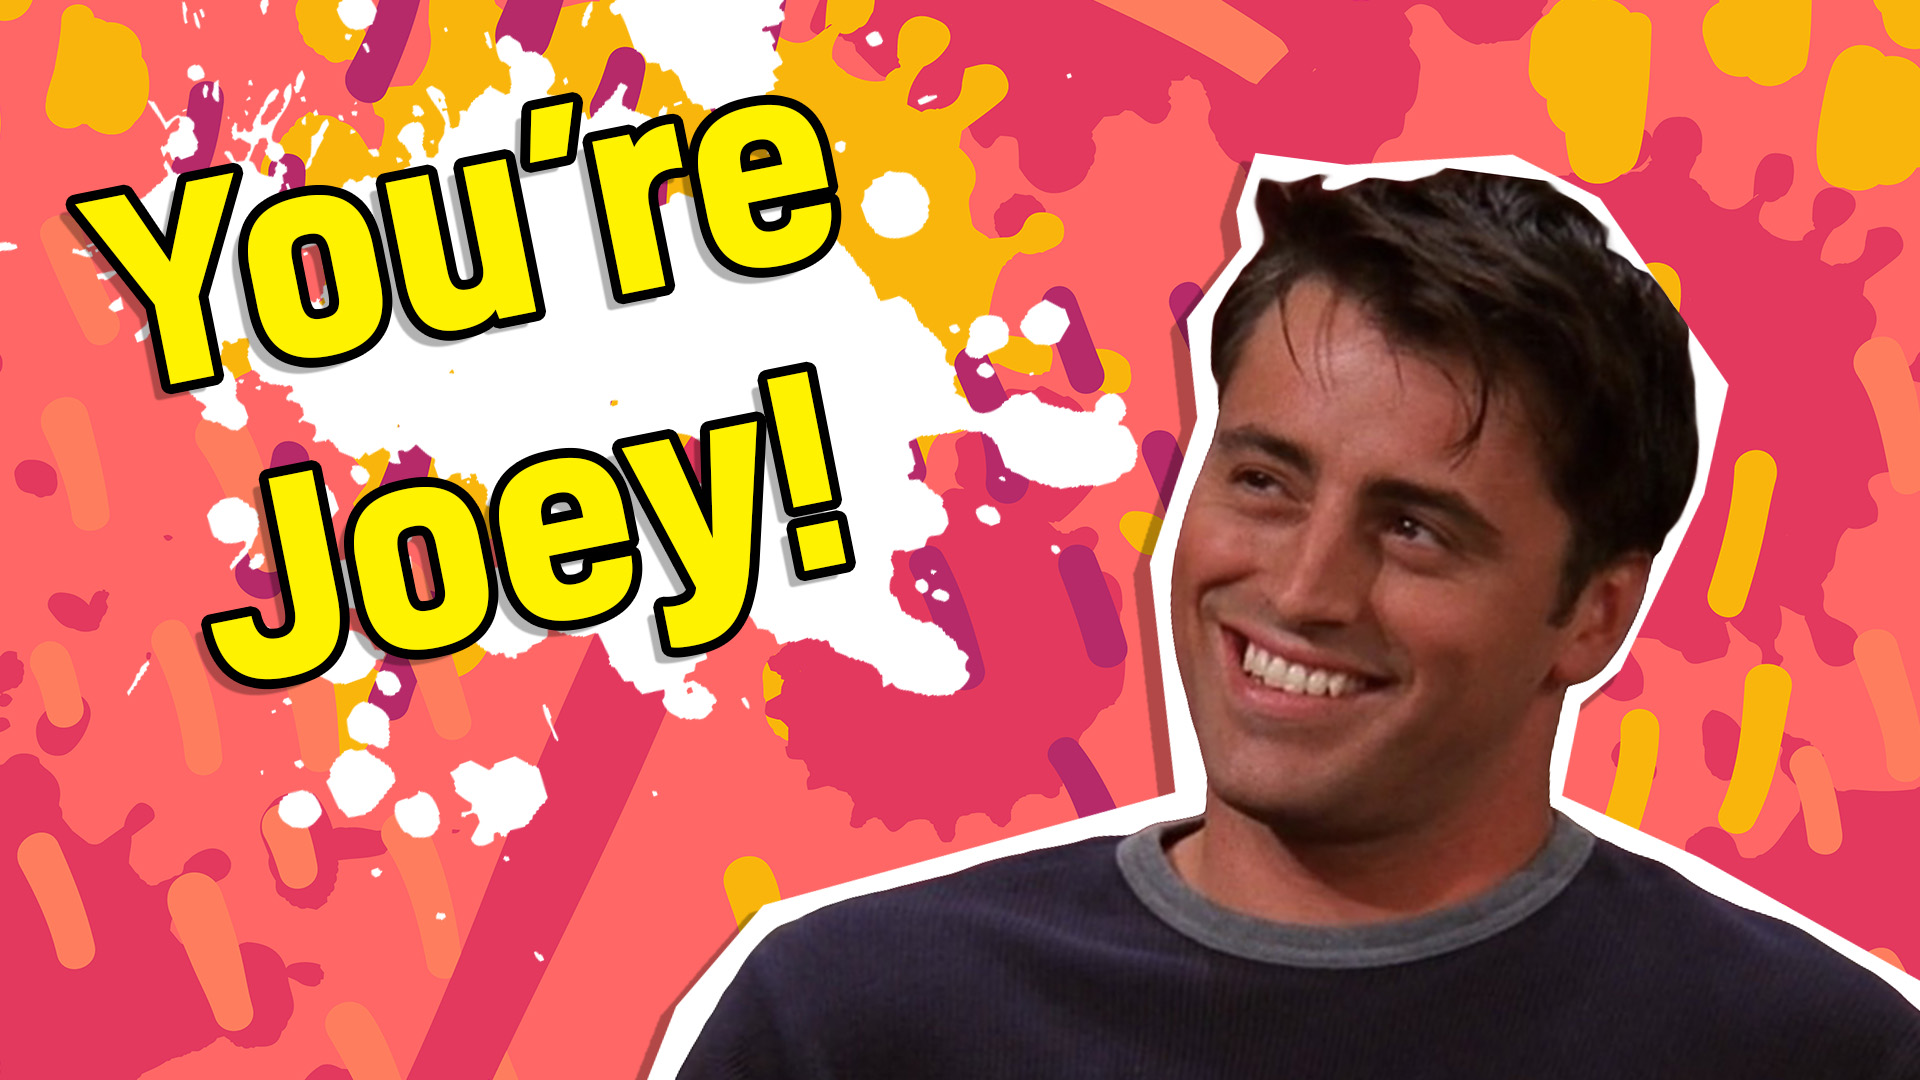 Your favourite is Joey!